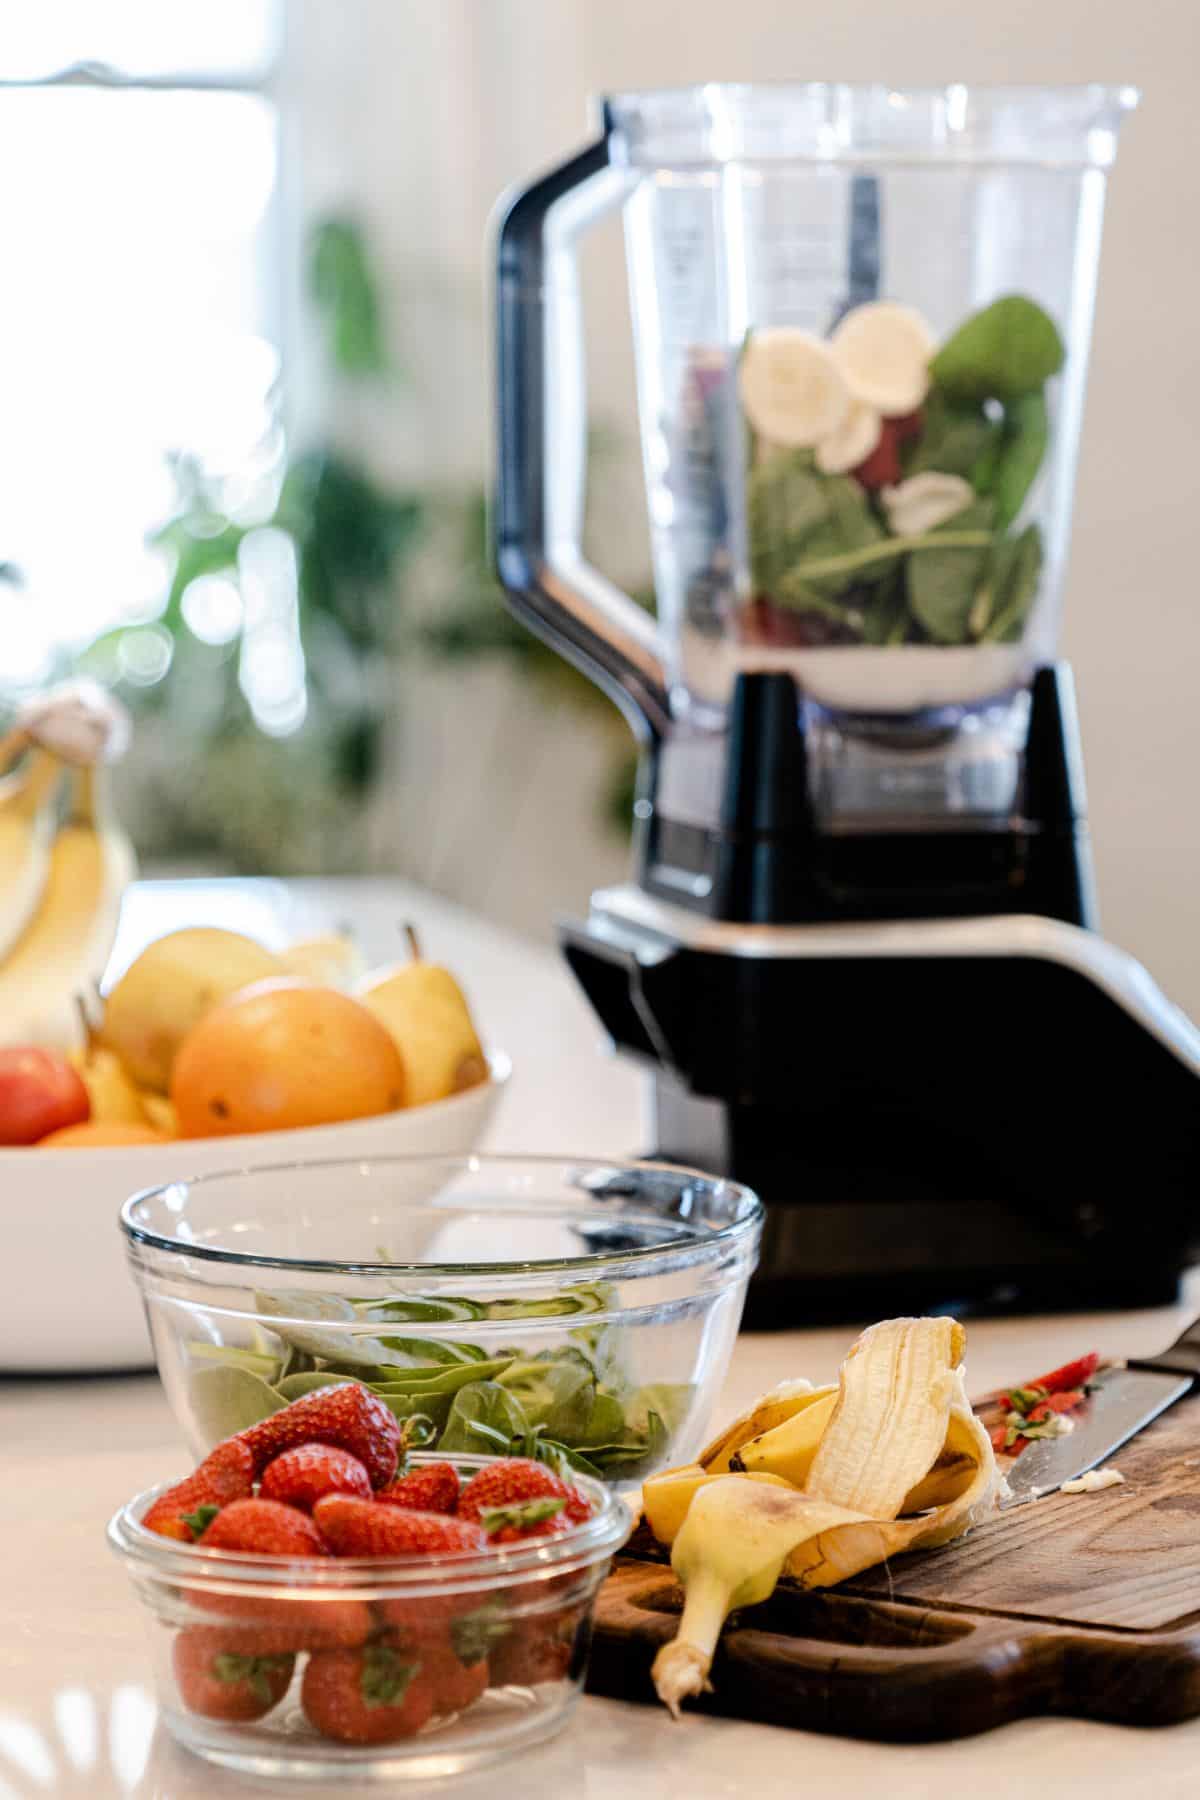 Bowl of fruit and smoothie ingredients next to a blender on the counter.